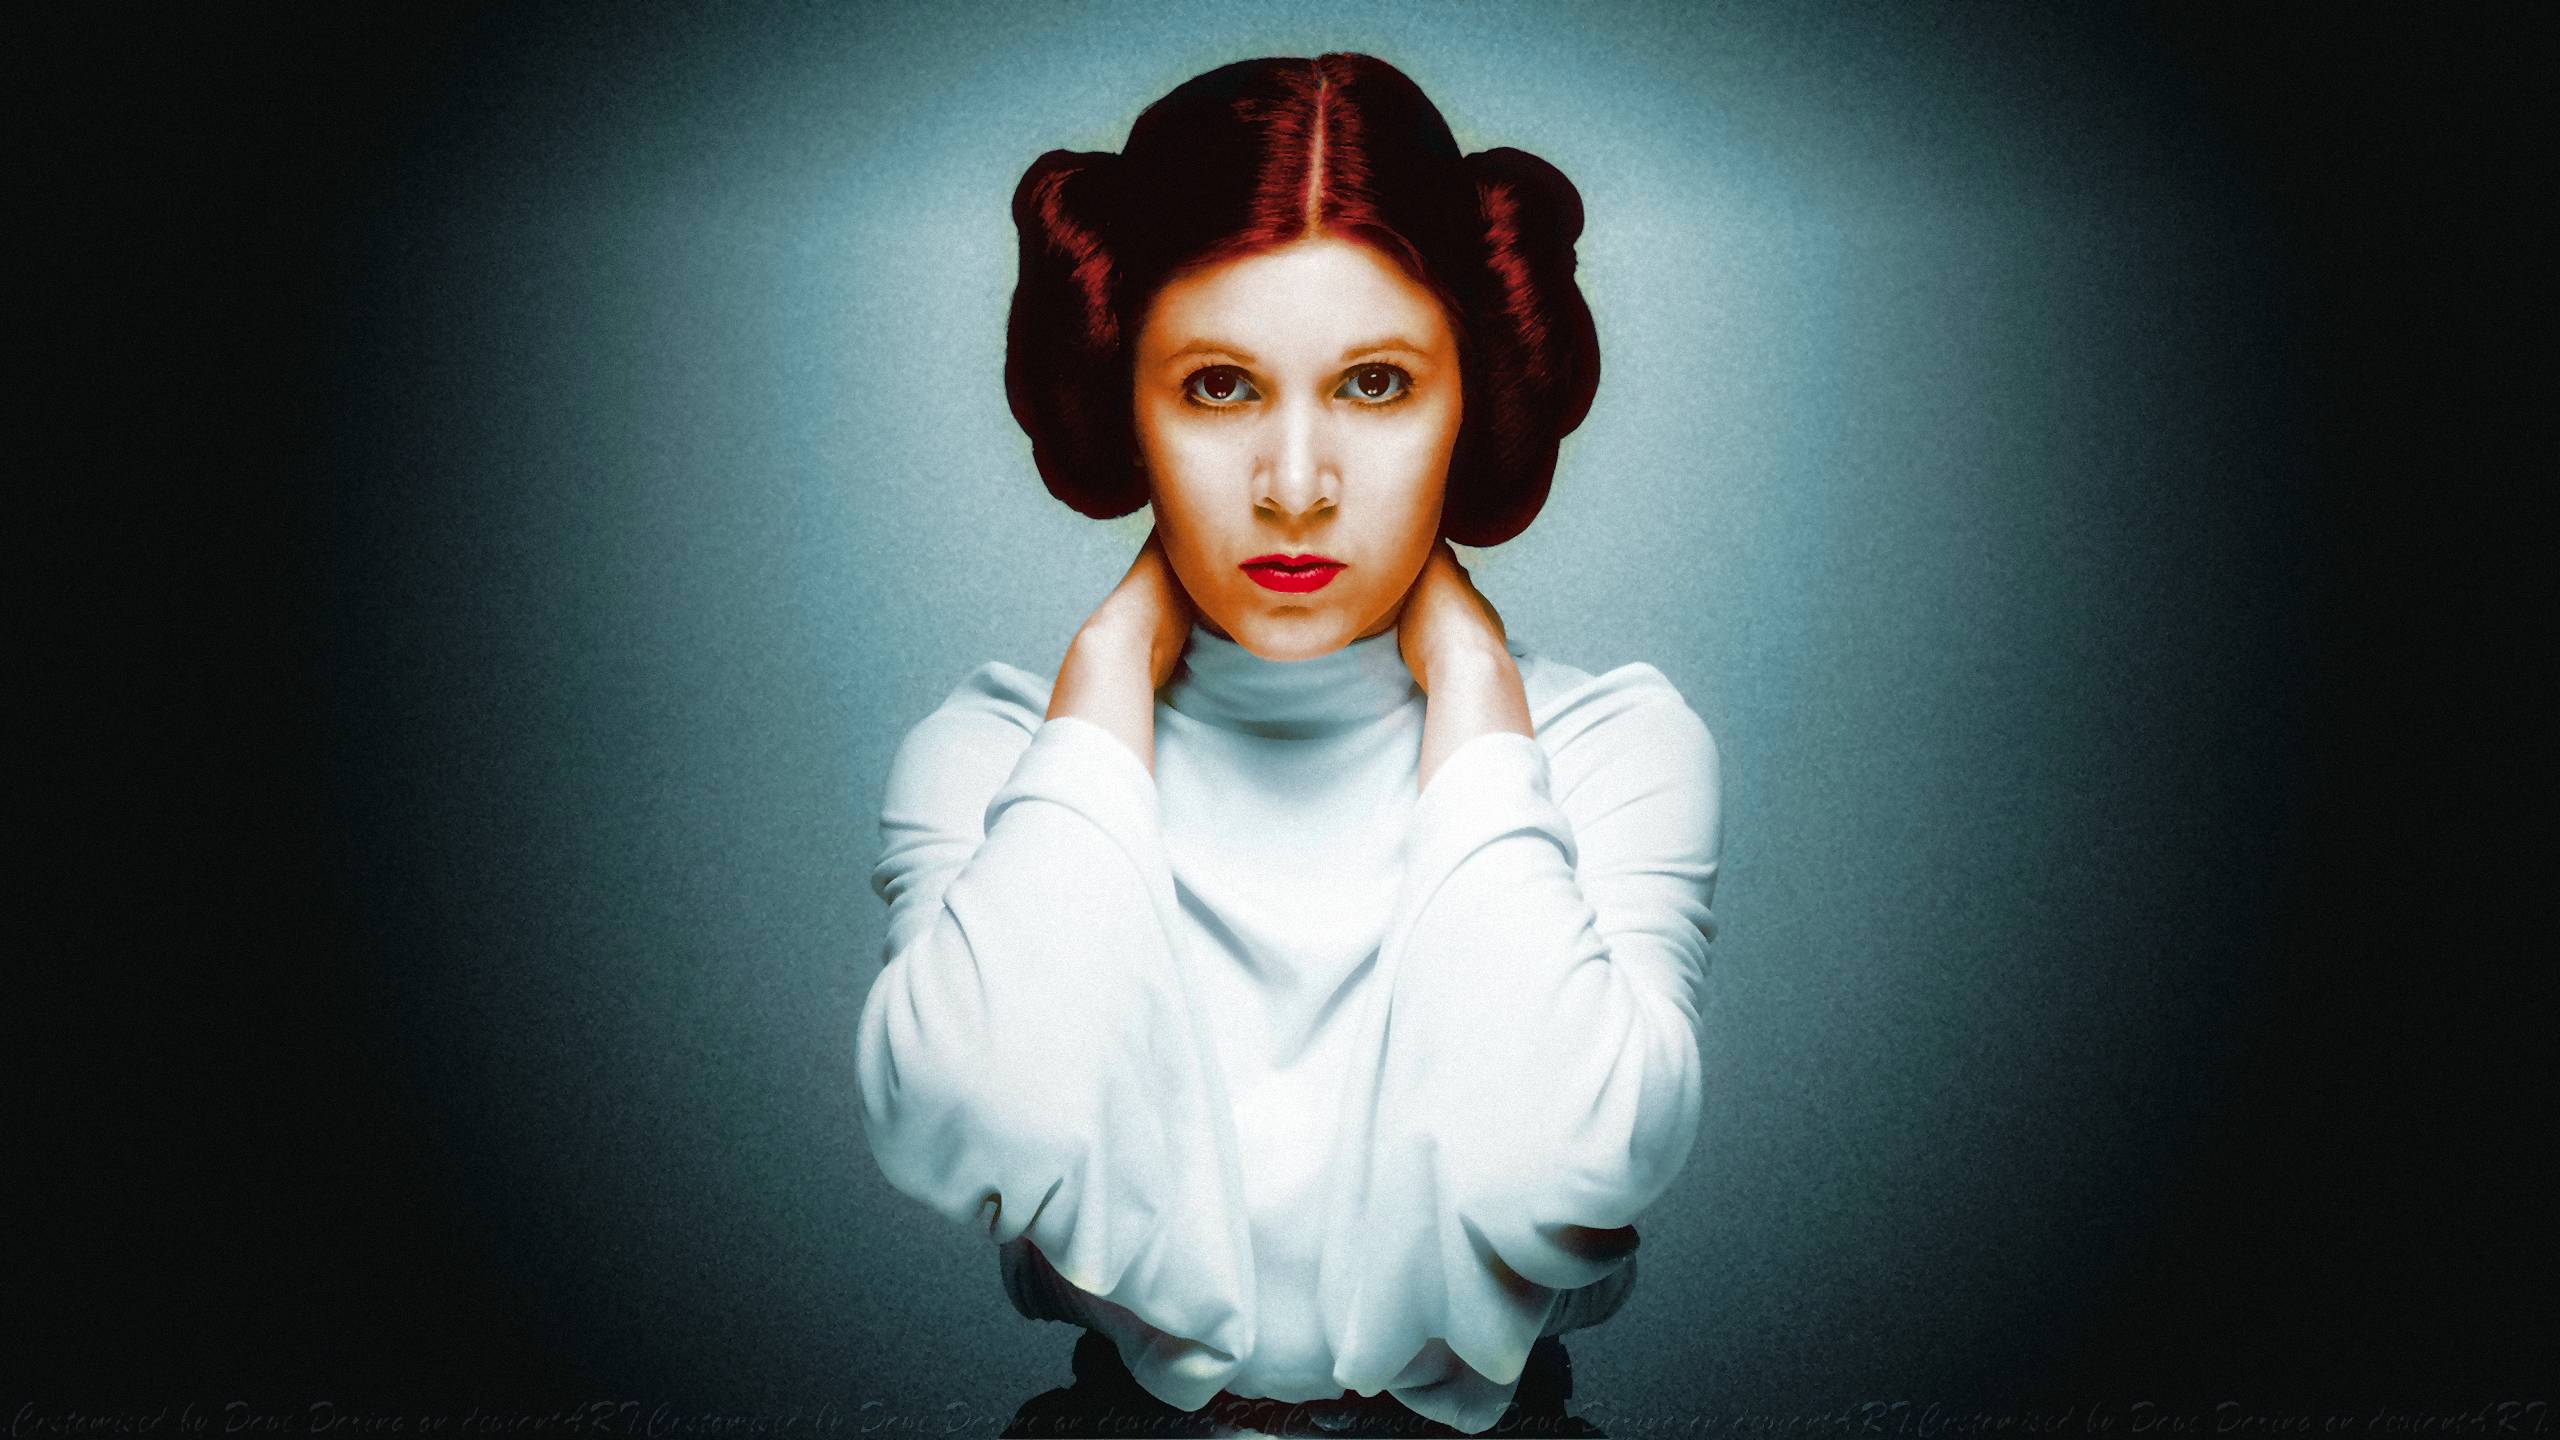 Carrie Fisher Princess Leia Colourized By Dave Daring On